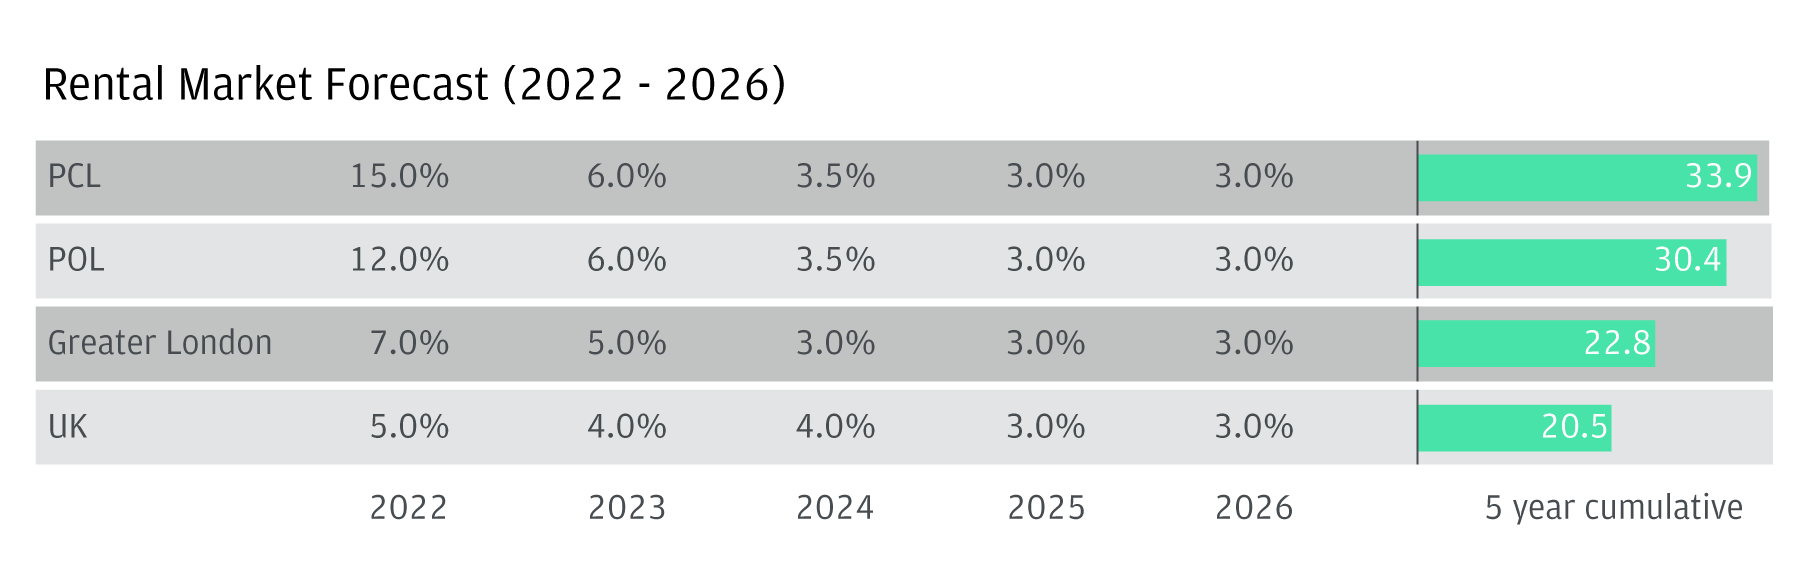 This table and bar chart show the projected growth in the Prime Central London and Prime outer London rental income being above 30% cumulative from 2022 – 2026.